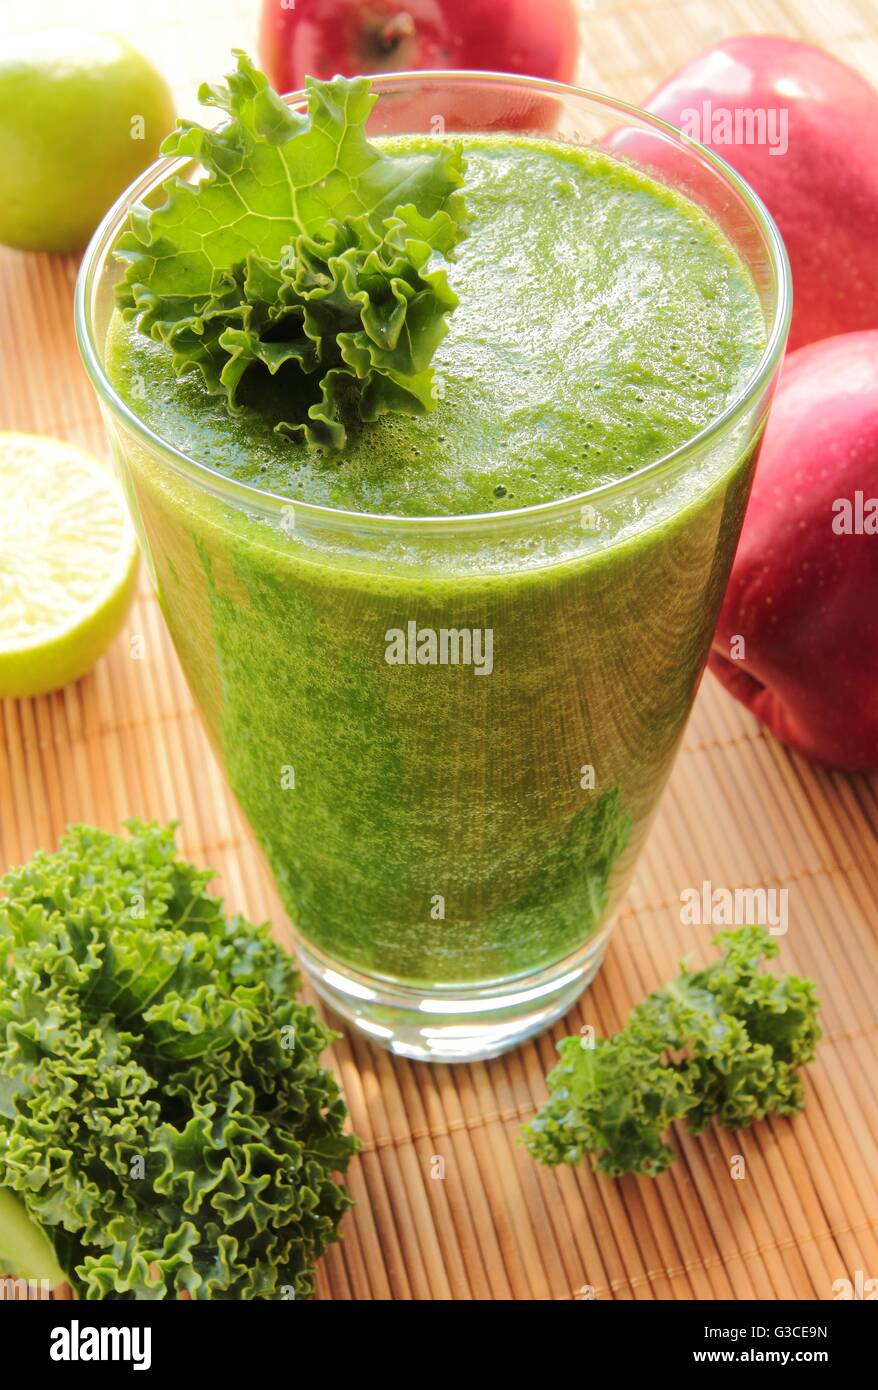 Glass of green smoothie with kale, apple and lime Stock Photo